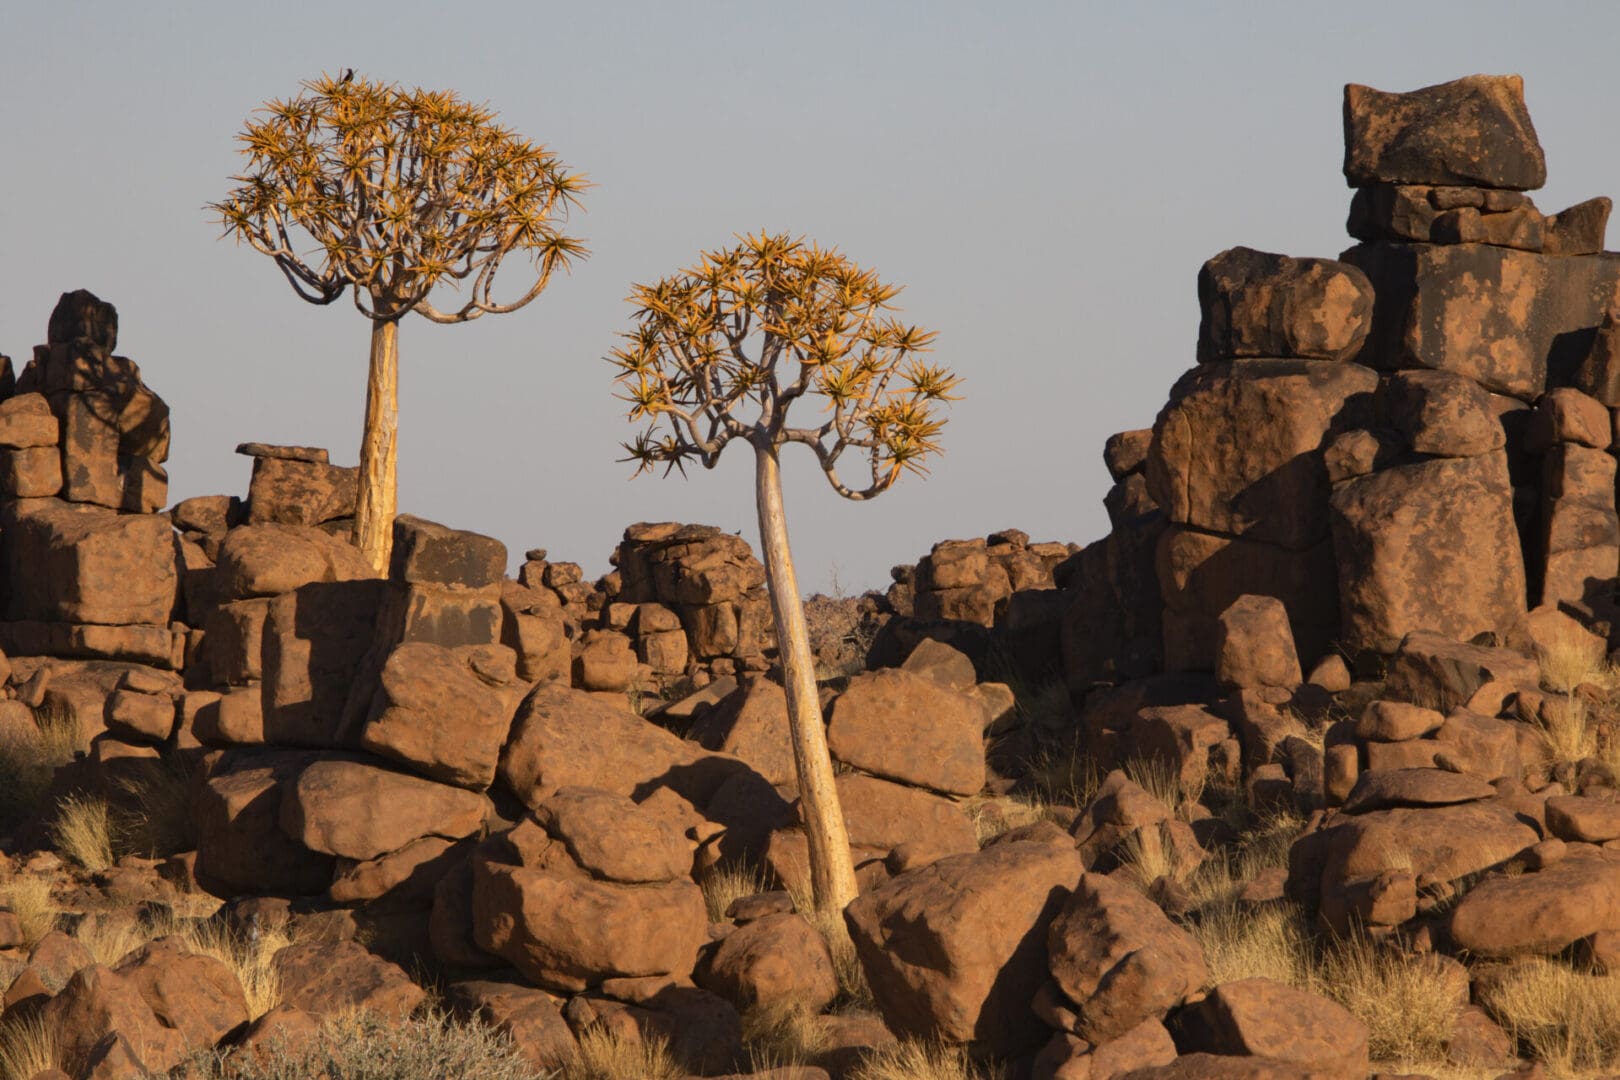 A group of trees and rocks in the desert.